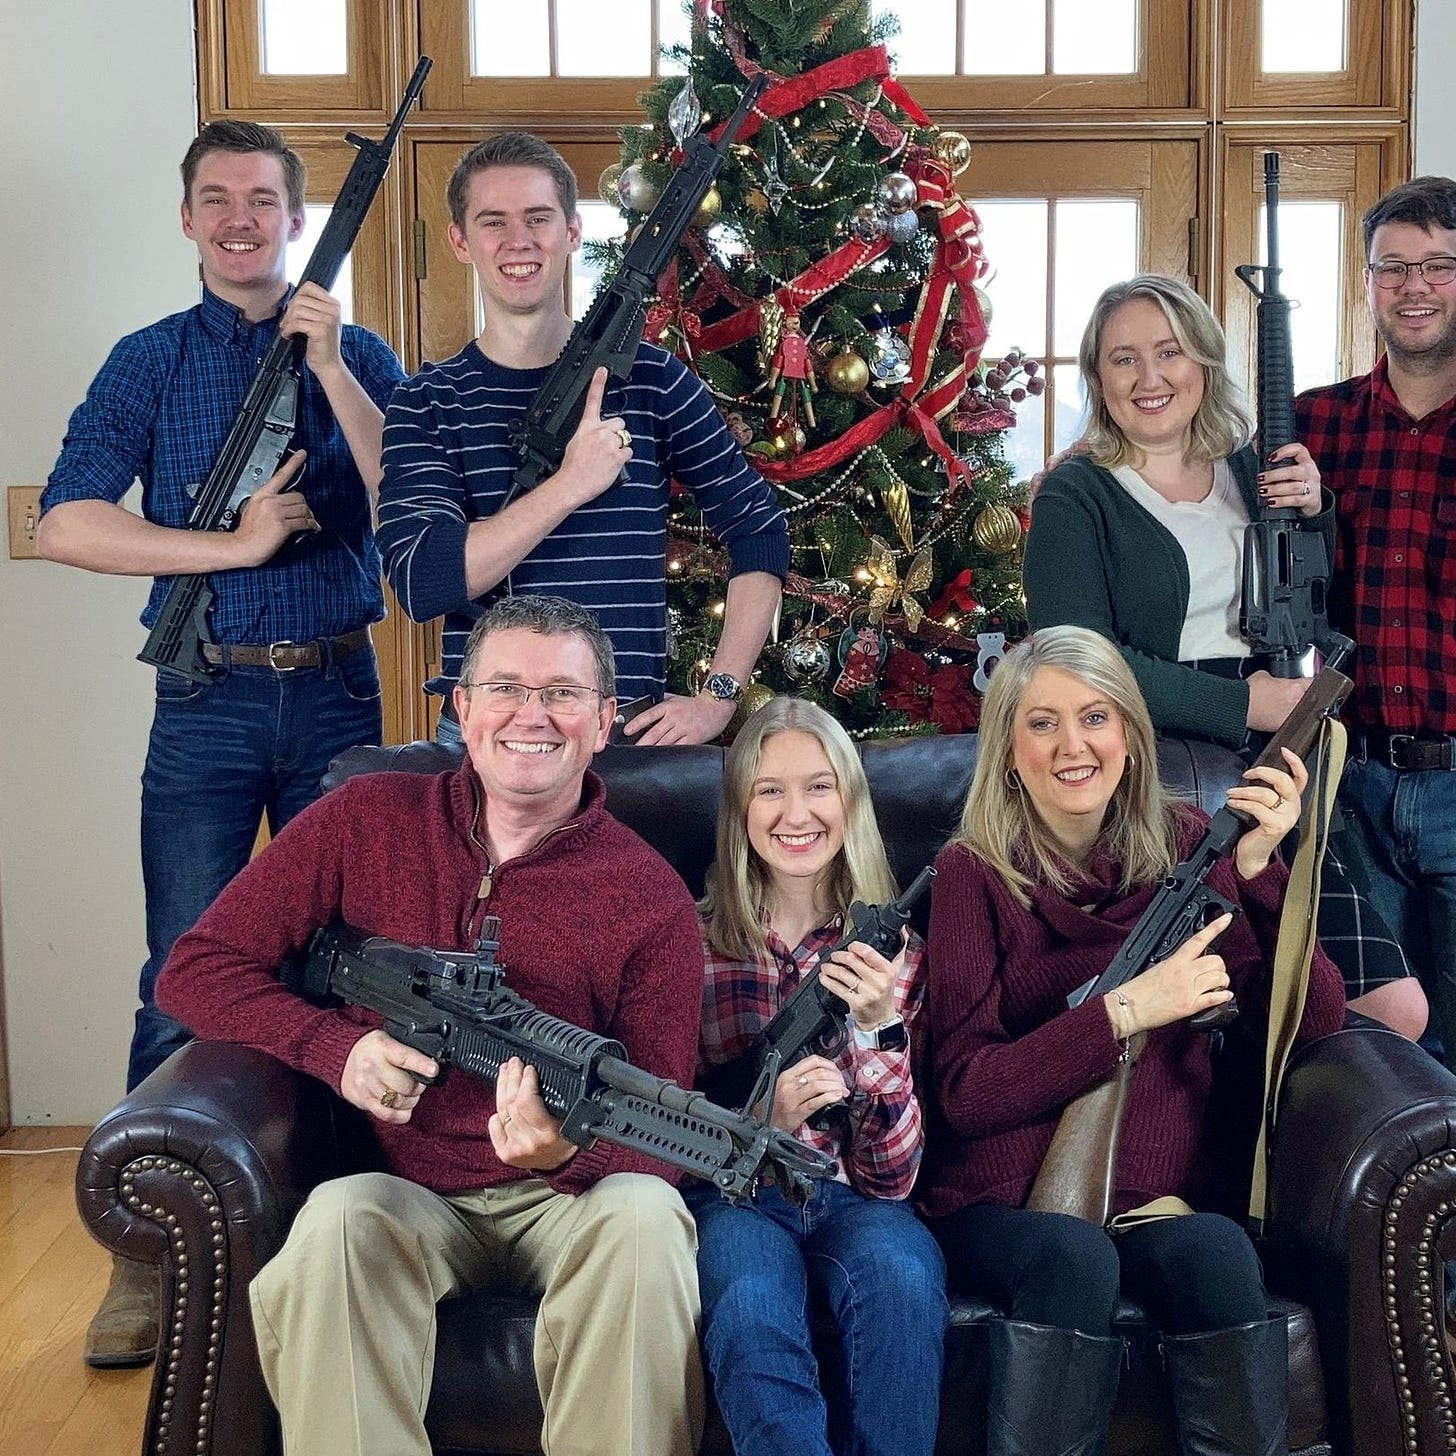 U.S. congressman posts family Christmas picture with guns, days after  school shooting | Reuters